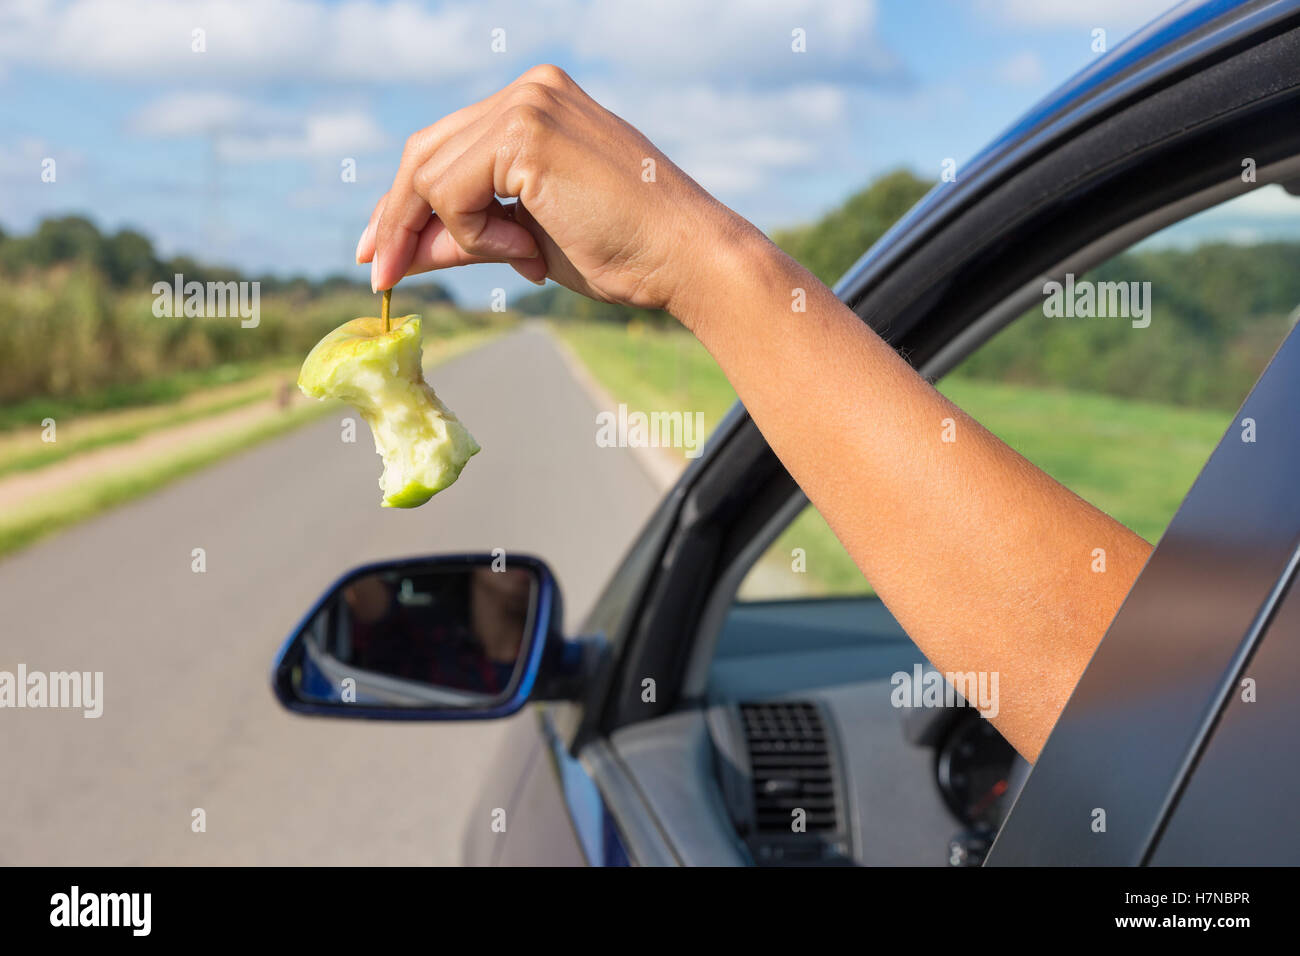 Female arm throwing  fruit waste out of car window Stock Photo